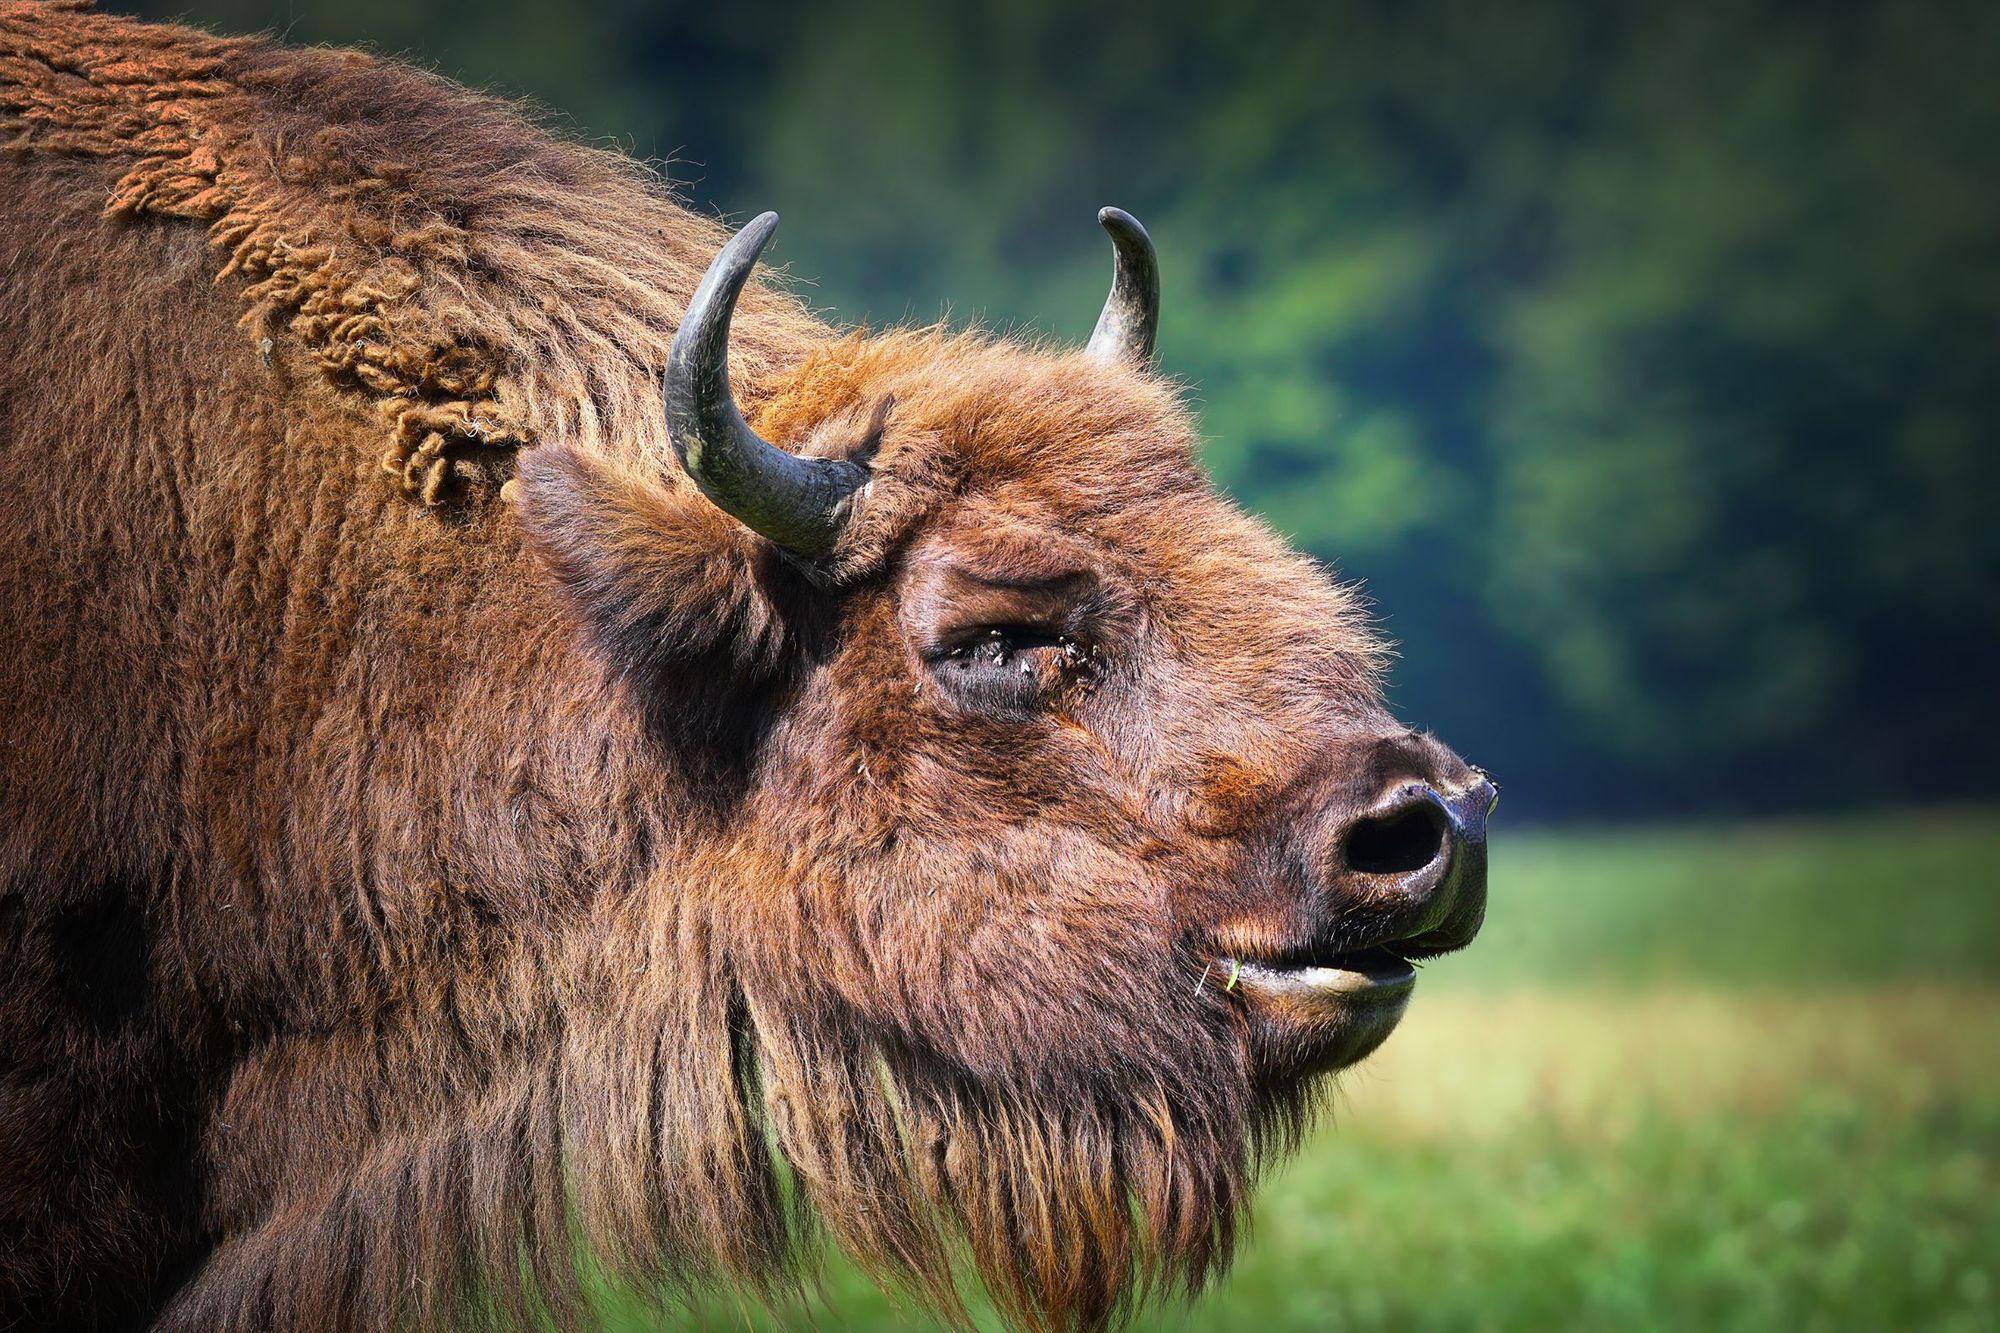 European bison can weigh up to 1000kg, meaning just their mere movement has huge impacts on the landscape. Photo: Getty